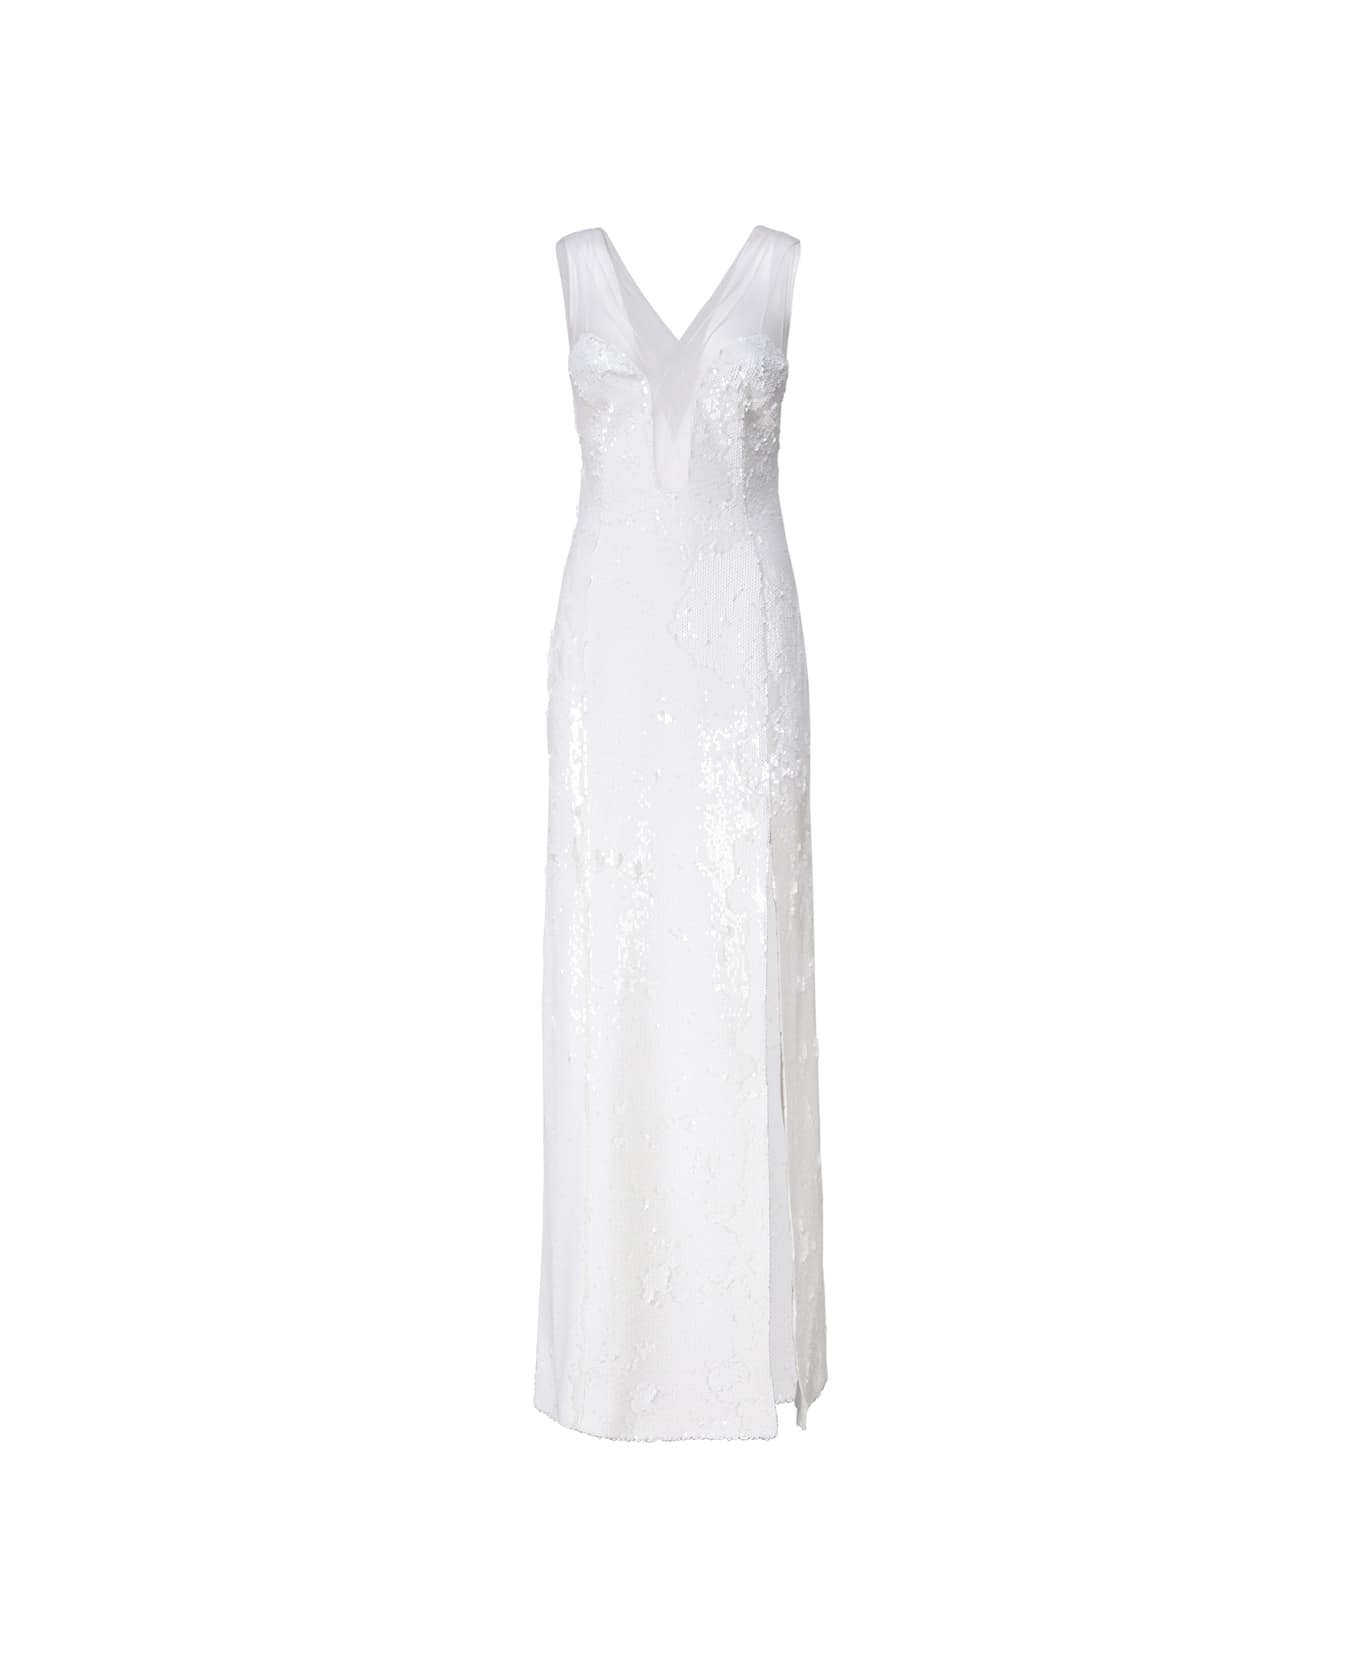 Genny Sequined Evening Dress - White